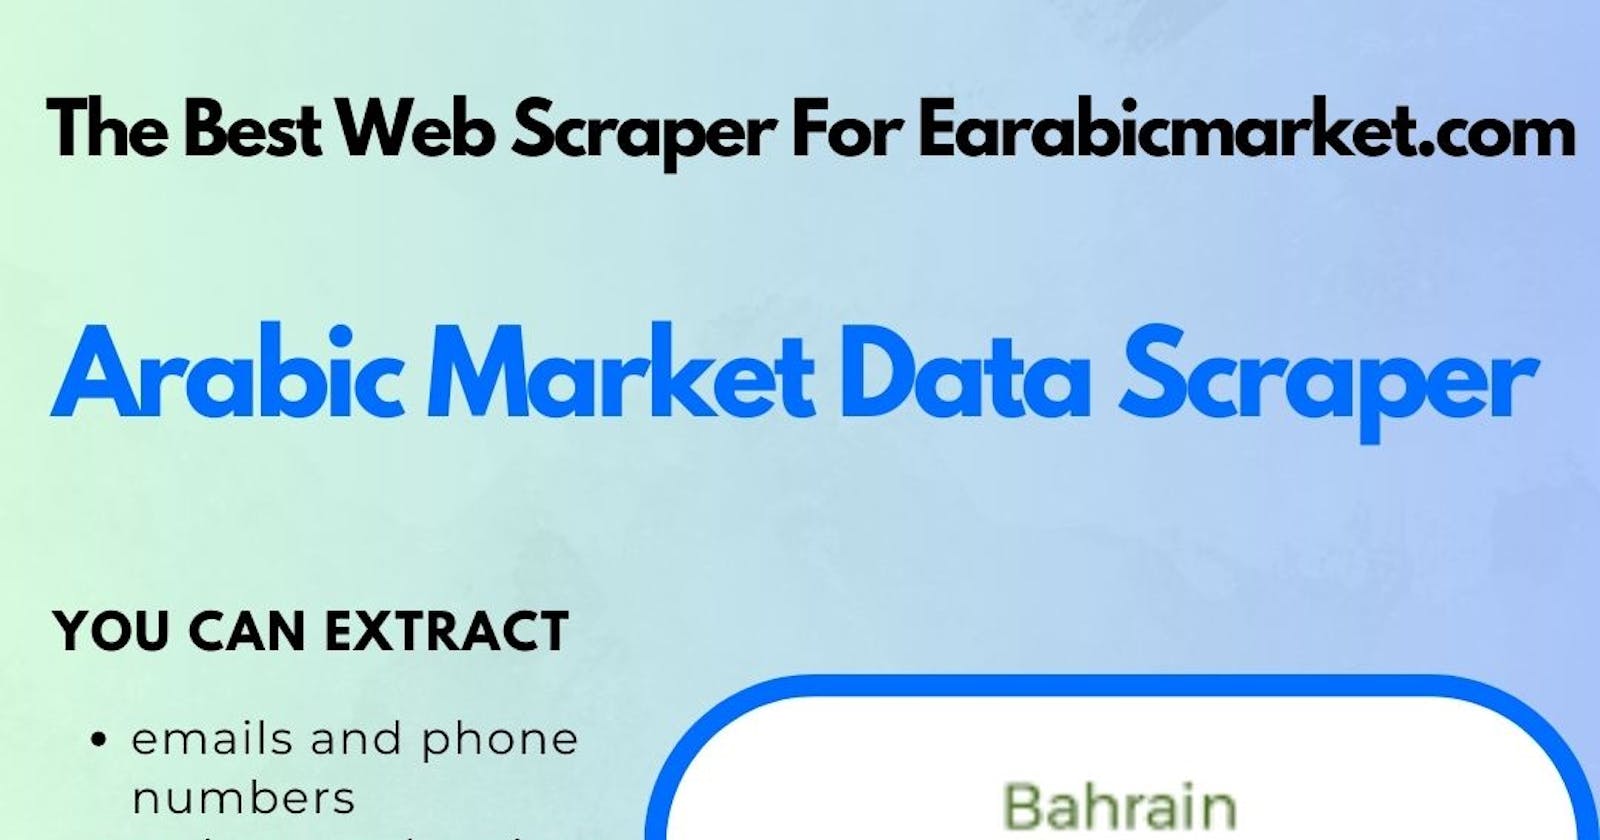 How To Scrape Product Data from Earabicmarket.com?